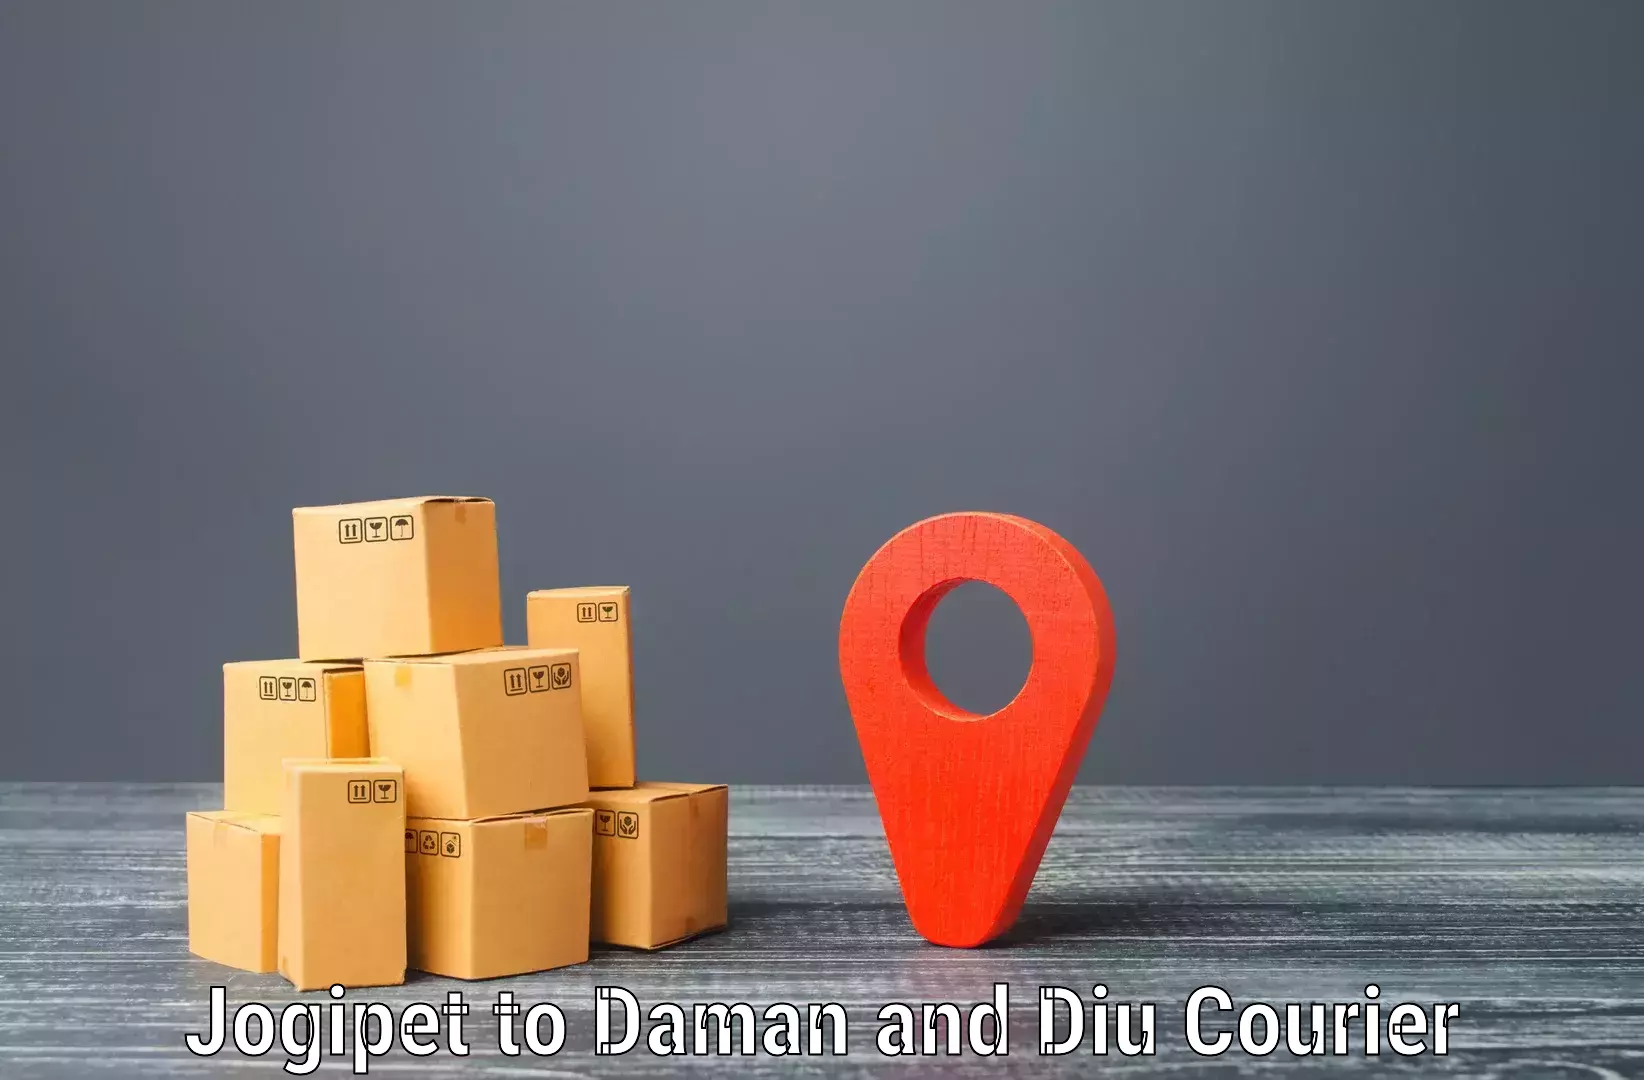 Nationwide parcel services Jogipet to Daman